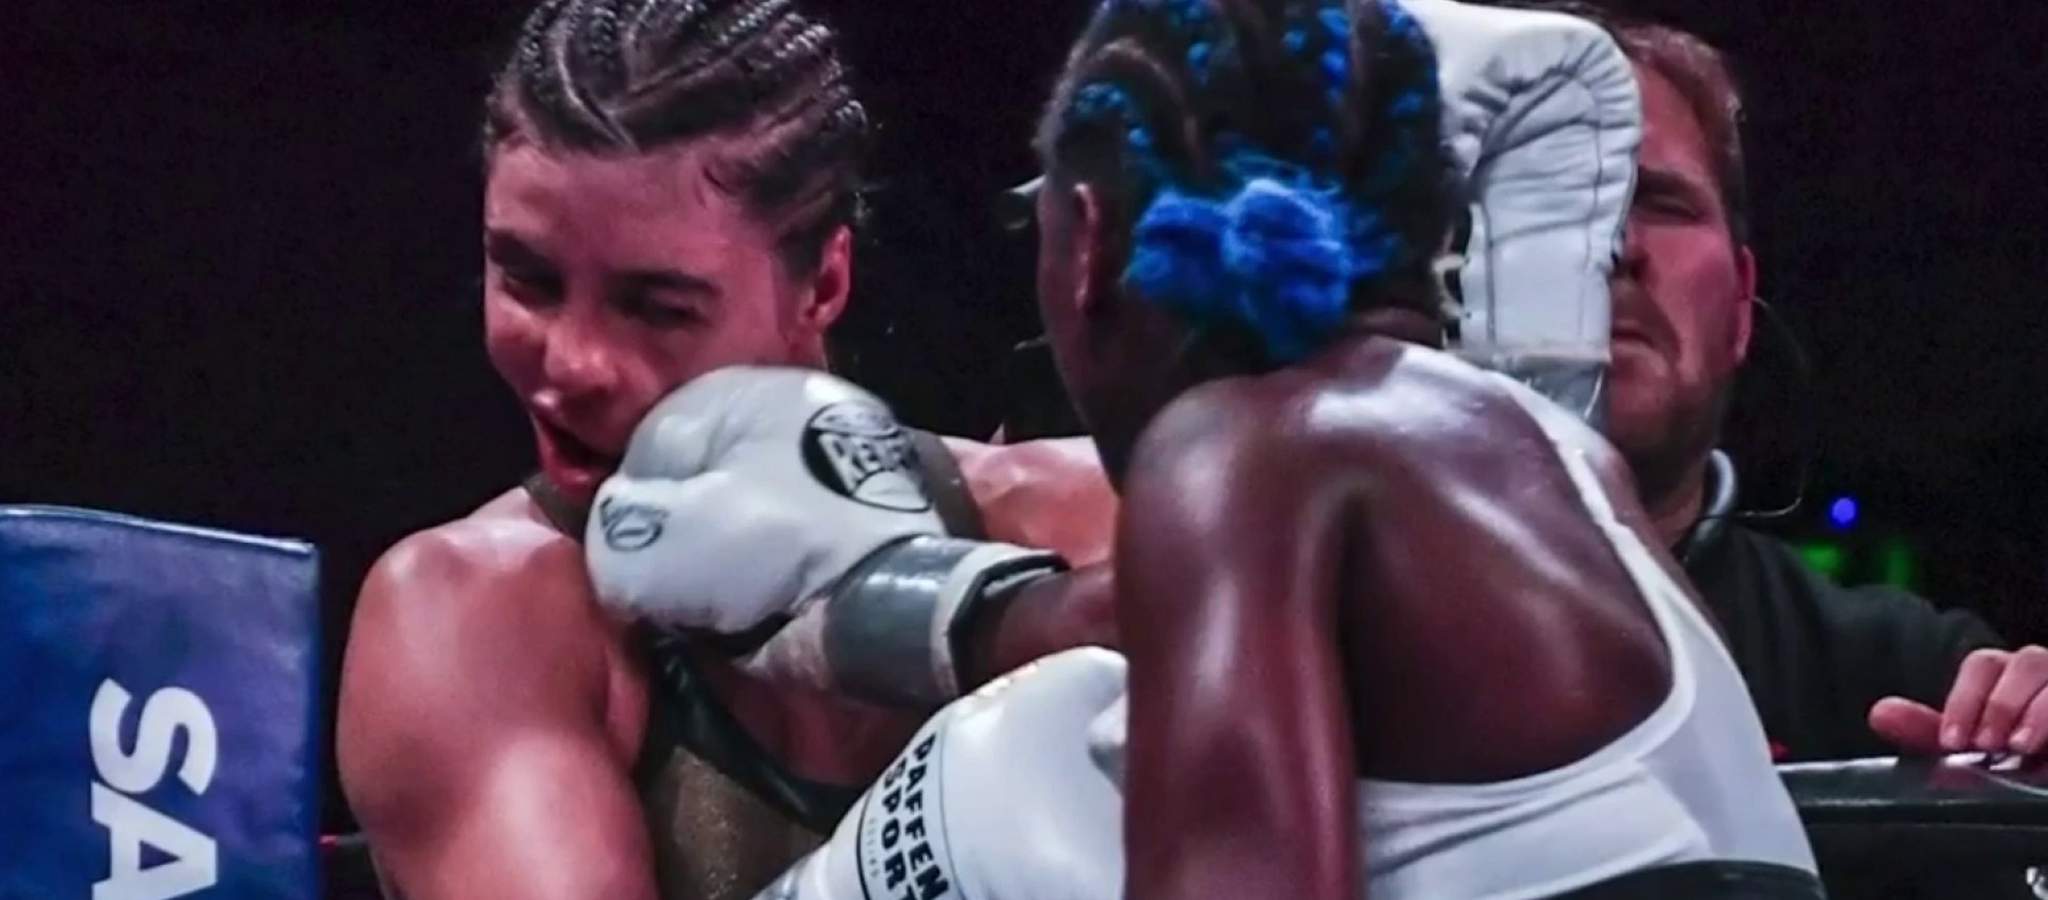 Flint native Claressa Shields continues to make history in the boxing ring